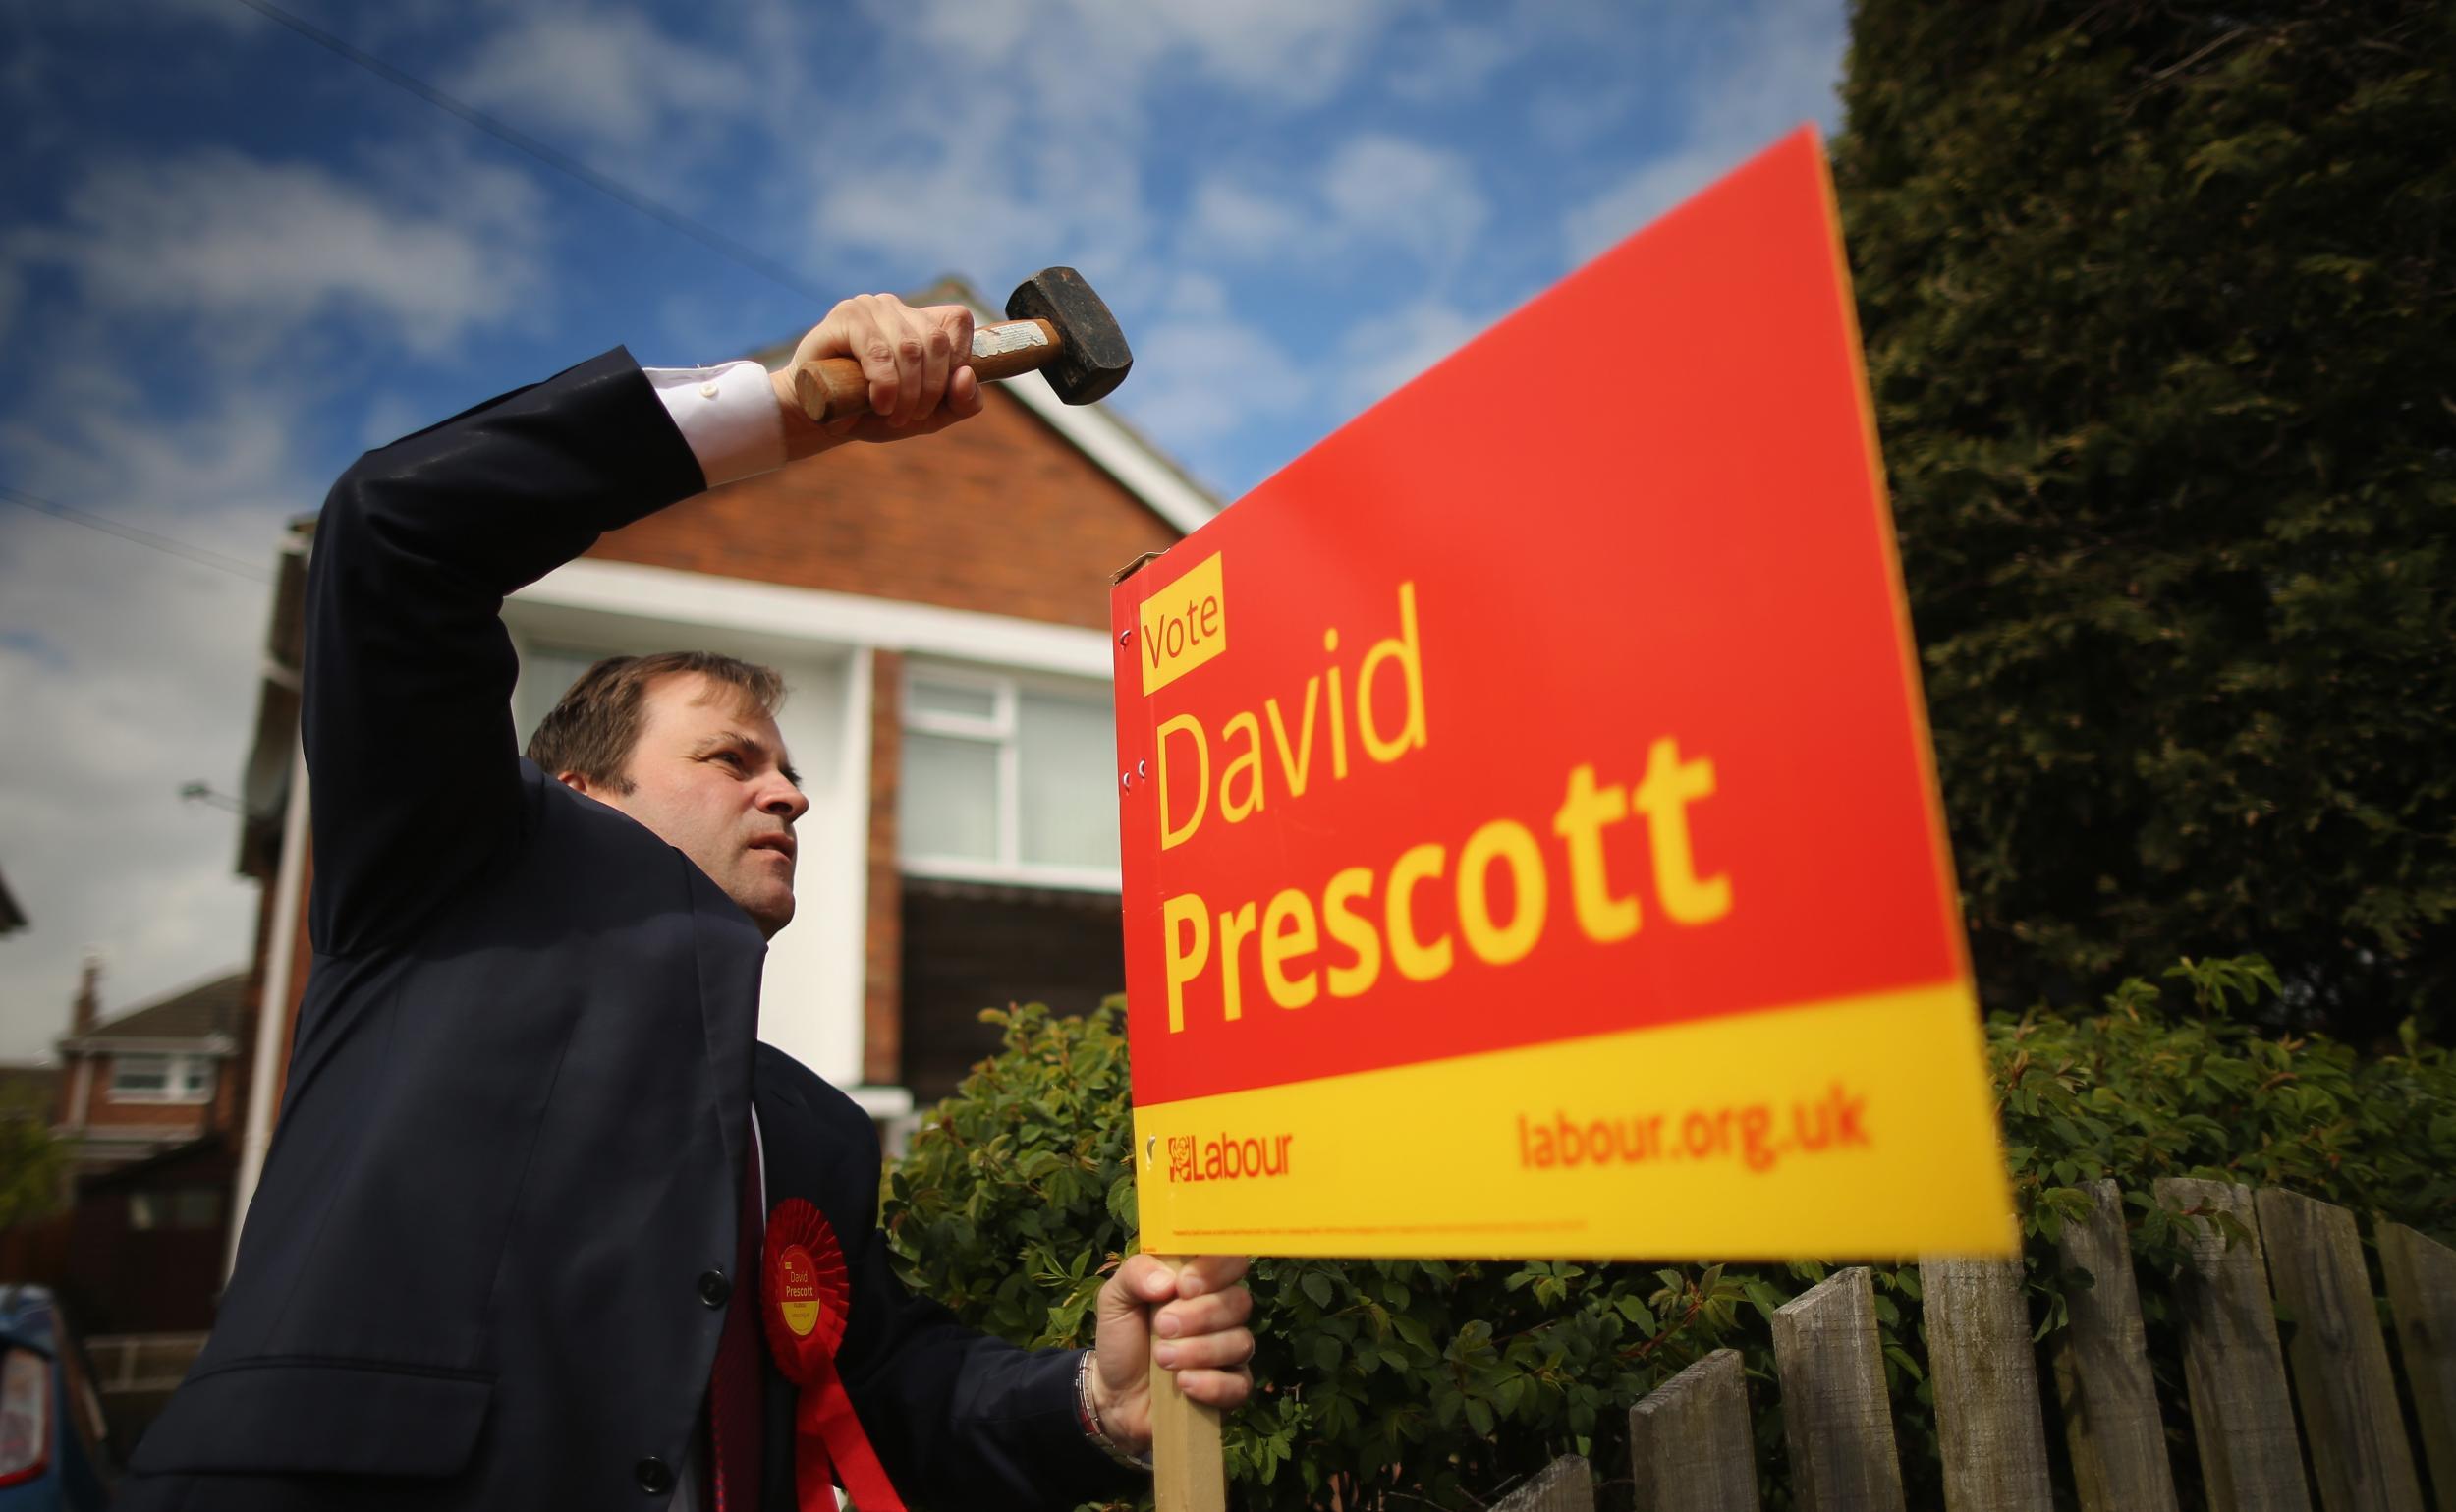 David Prescott, son of John, will become Jeremy Corbyn's speechwriter at the end of the year.